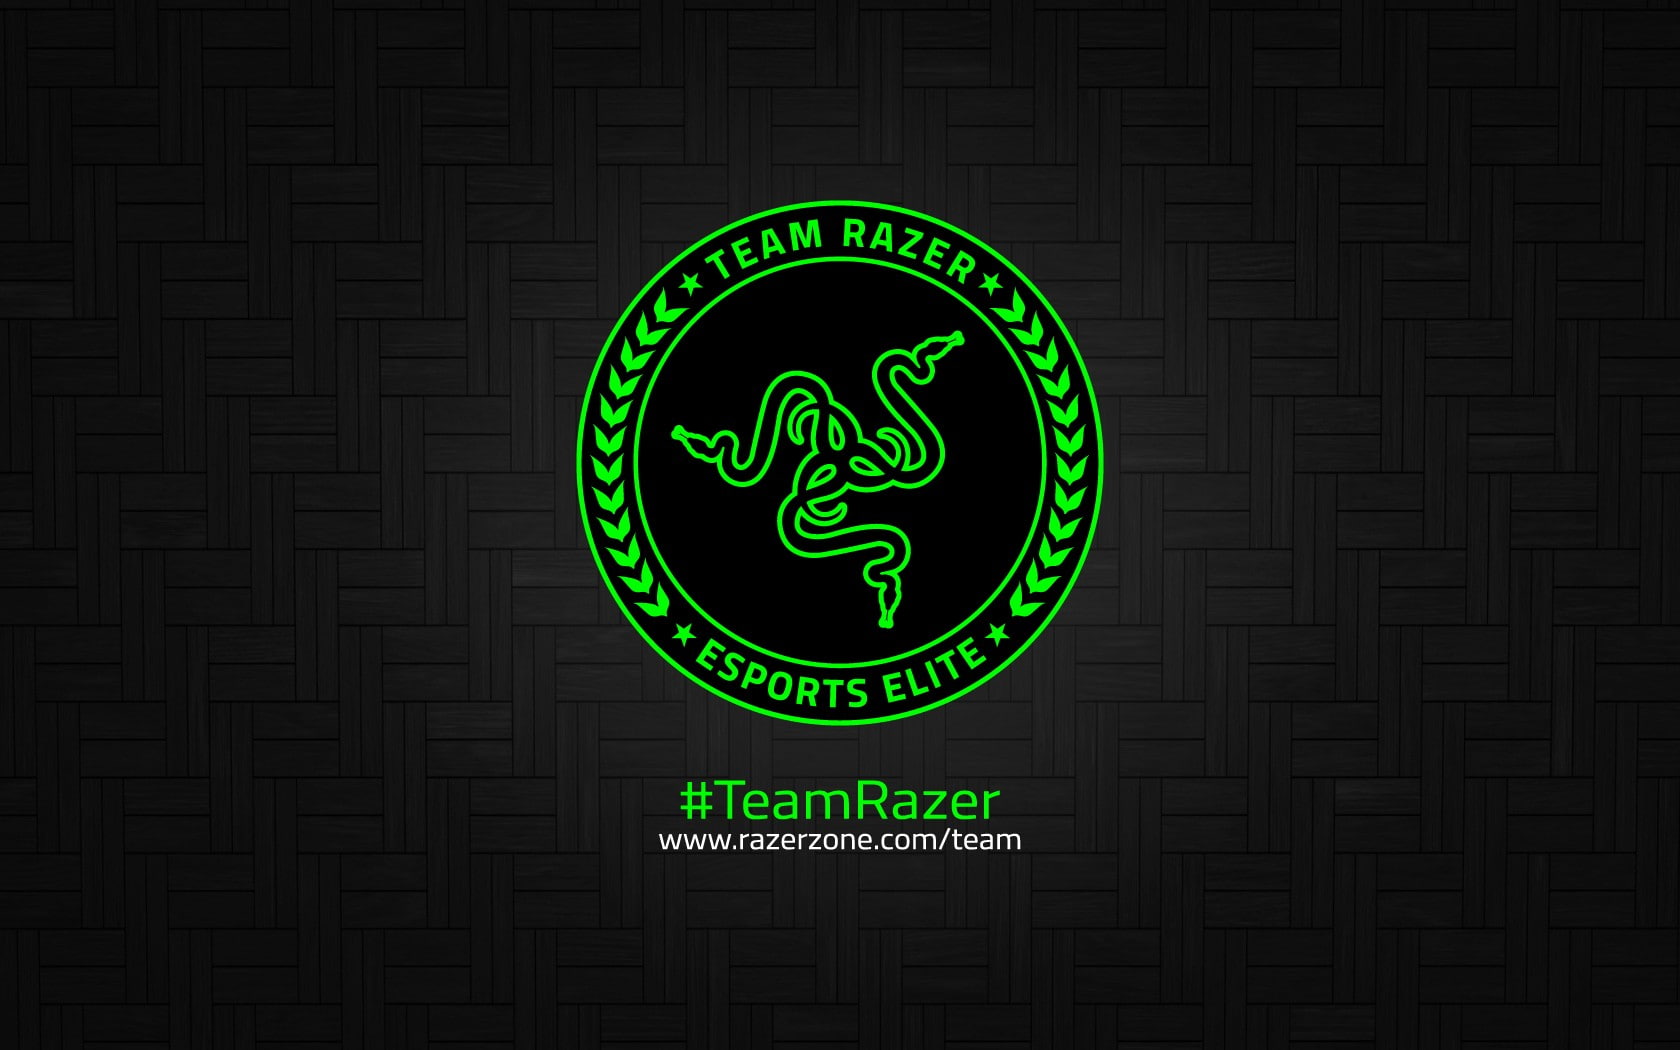 Razer, communication, sign, text, green color, no people, illuminated